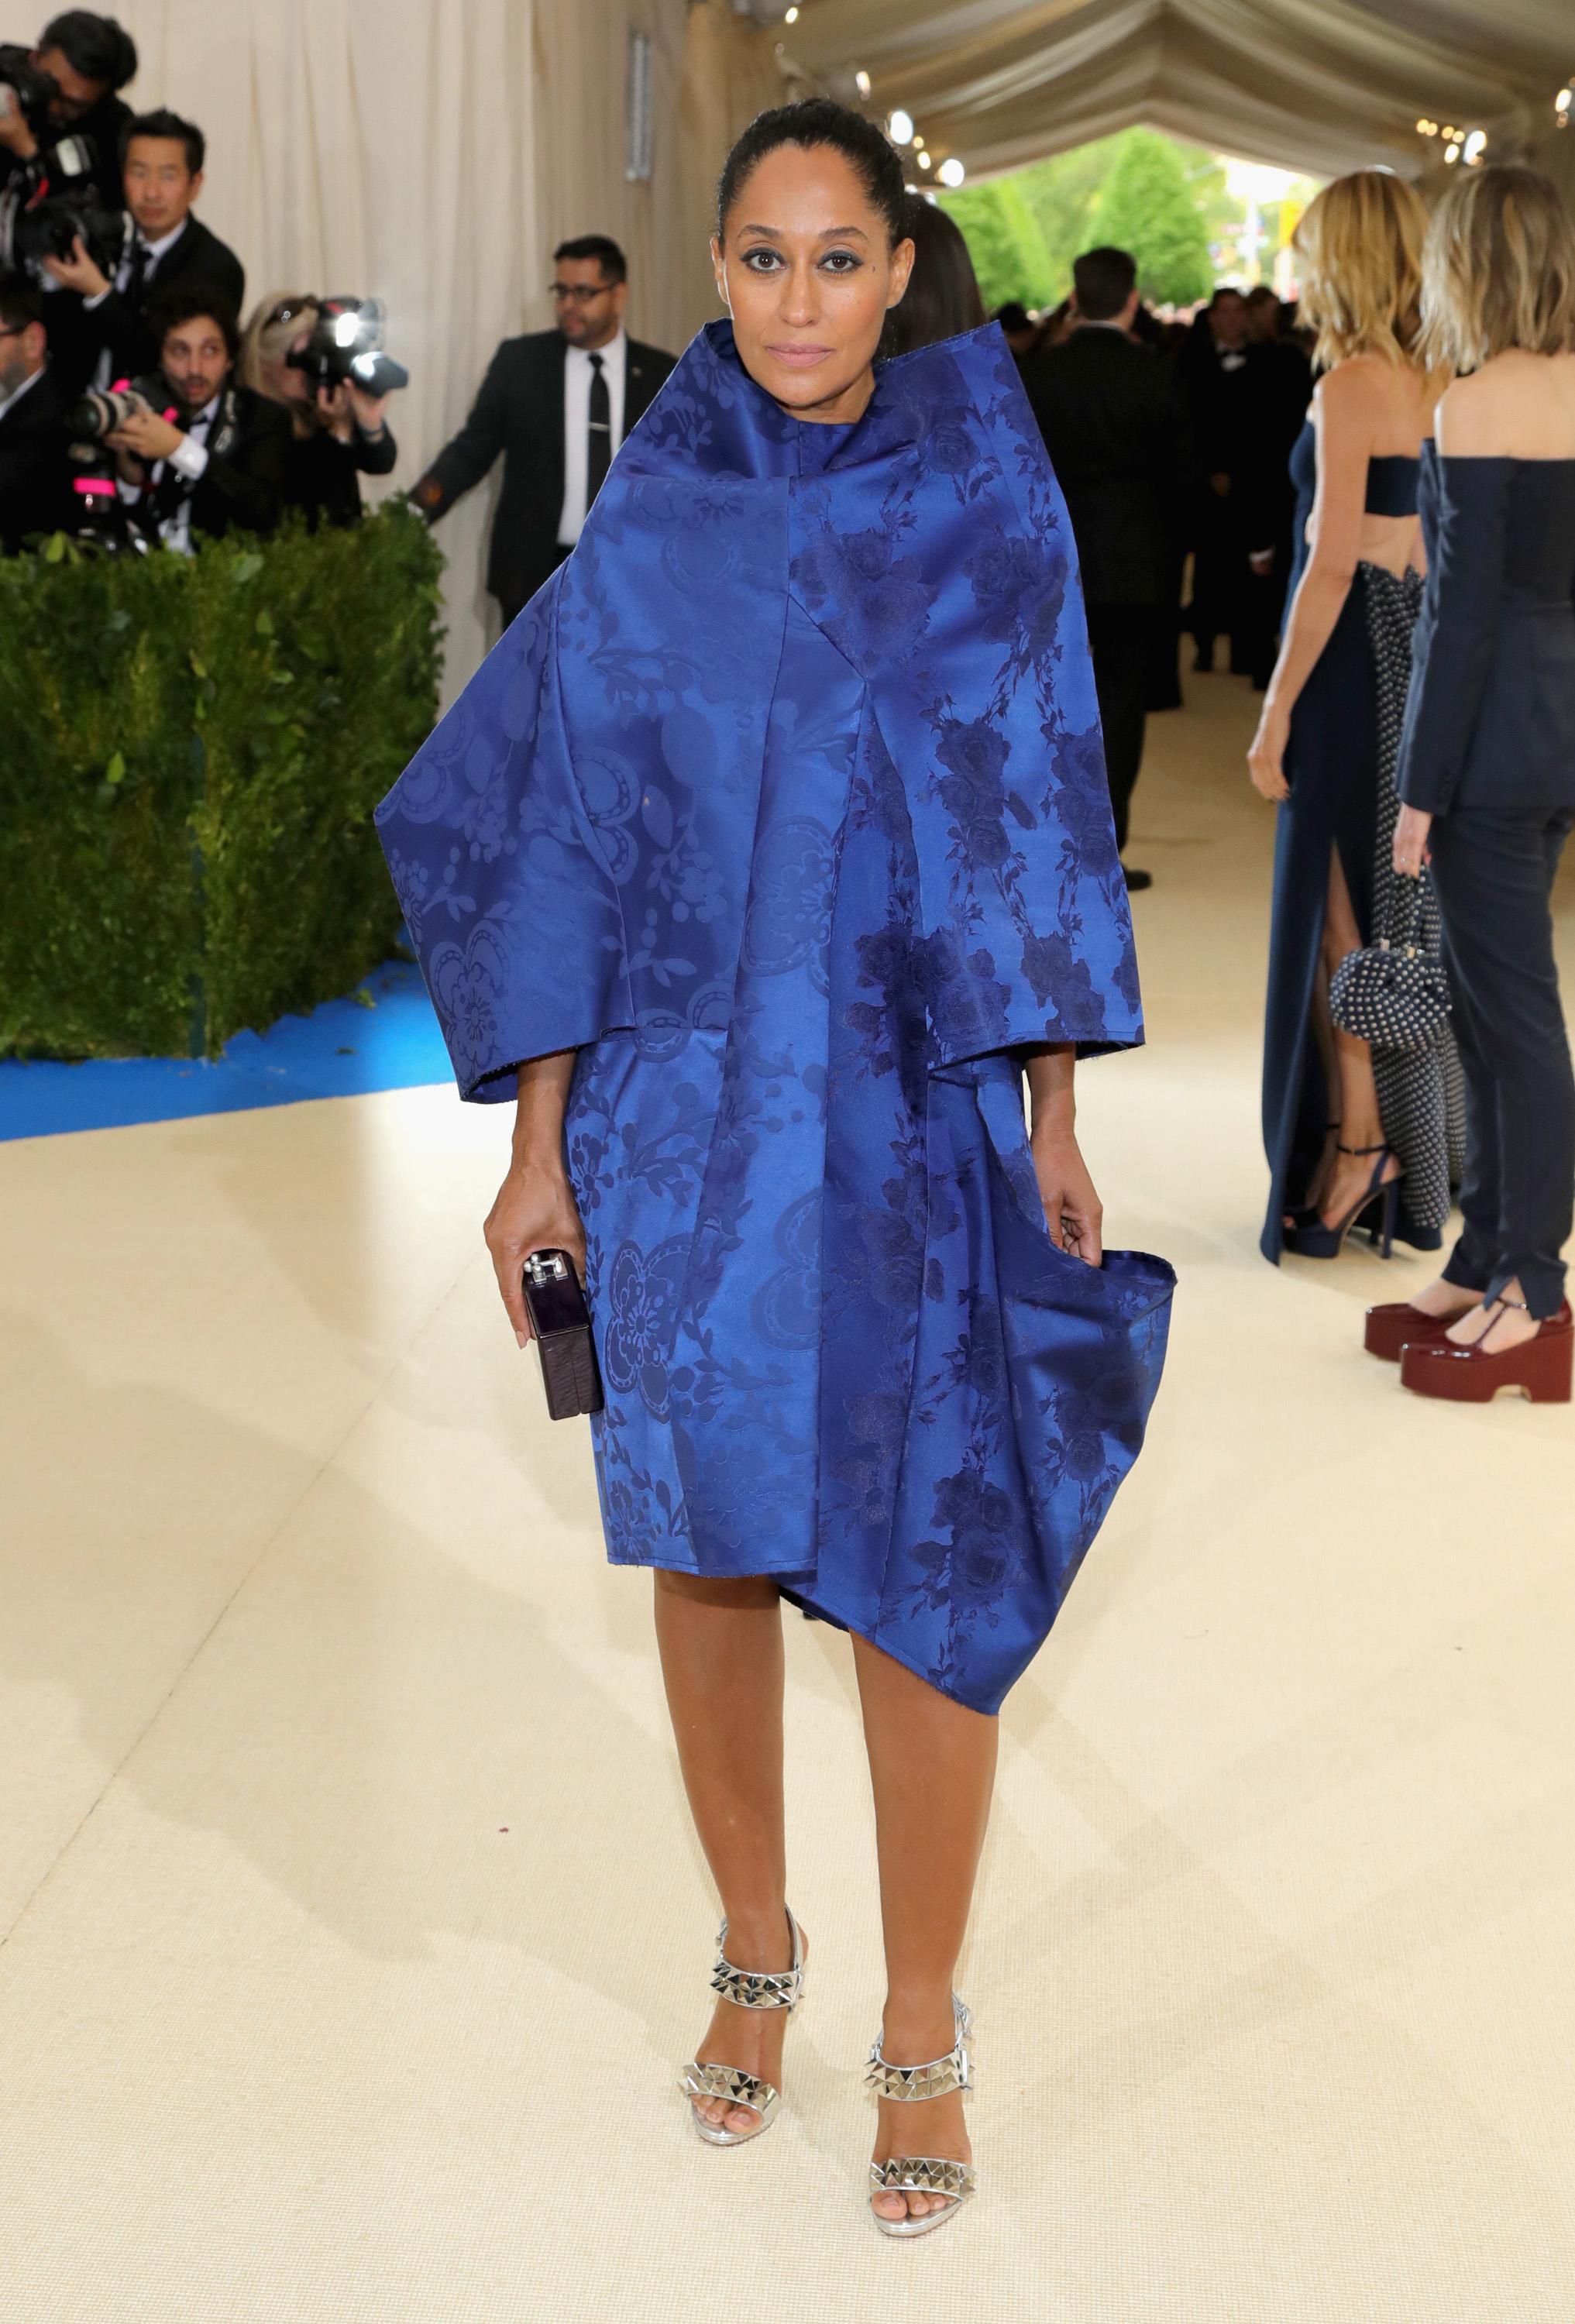 7 People Who Actually Wore Comme des Garçons to the Met Gala